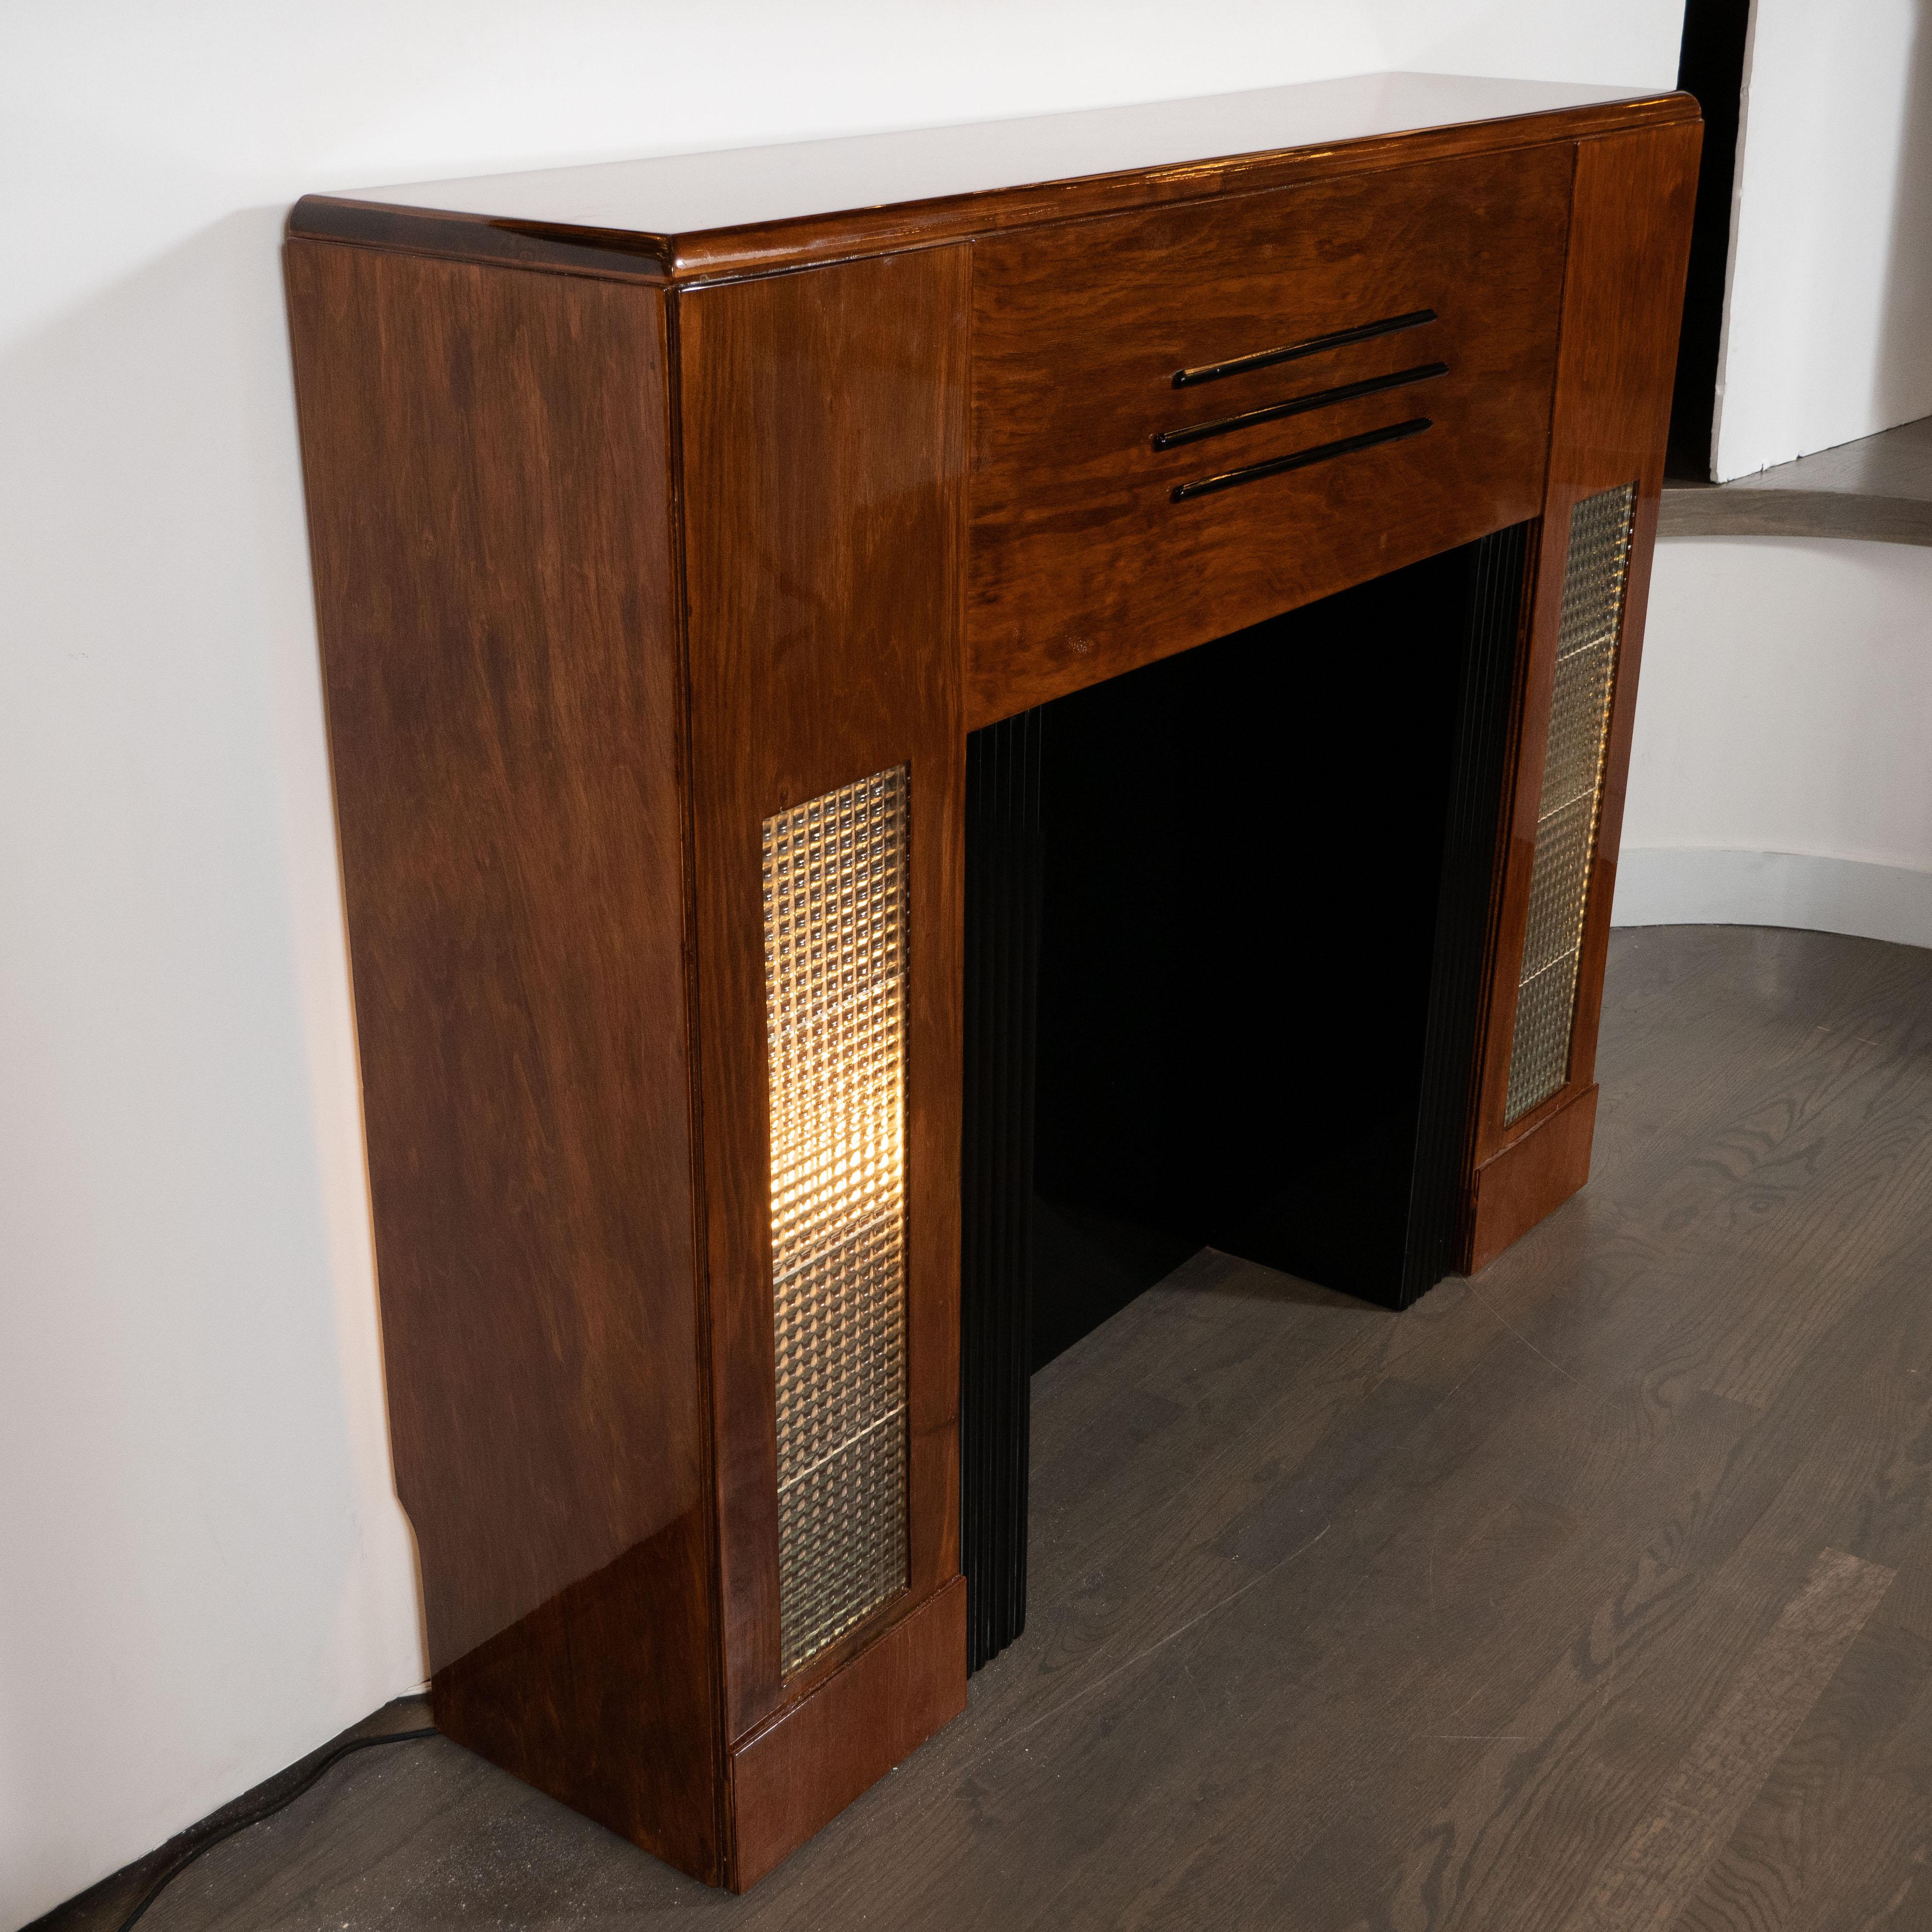 Mid-20th Century Art Deco Machine Age Bookmatched Walnut, Lacquer & Textured Glass Fireplace